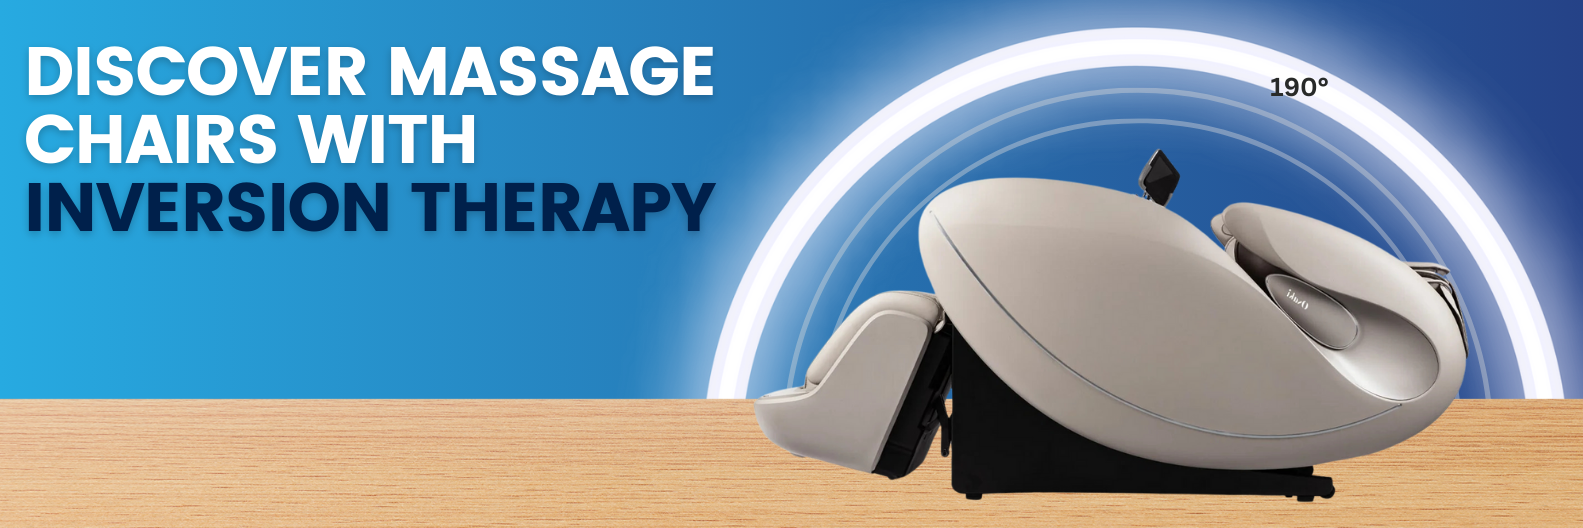 Experience ultimate comfort with Inversion Massage Chairs - the ideal combination of relaxation and inversion therapy for a rejuvenating experience.